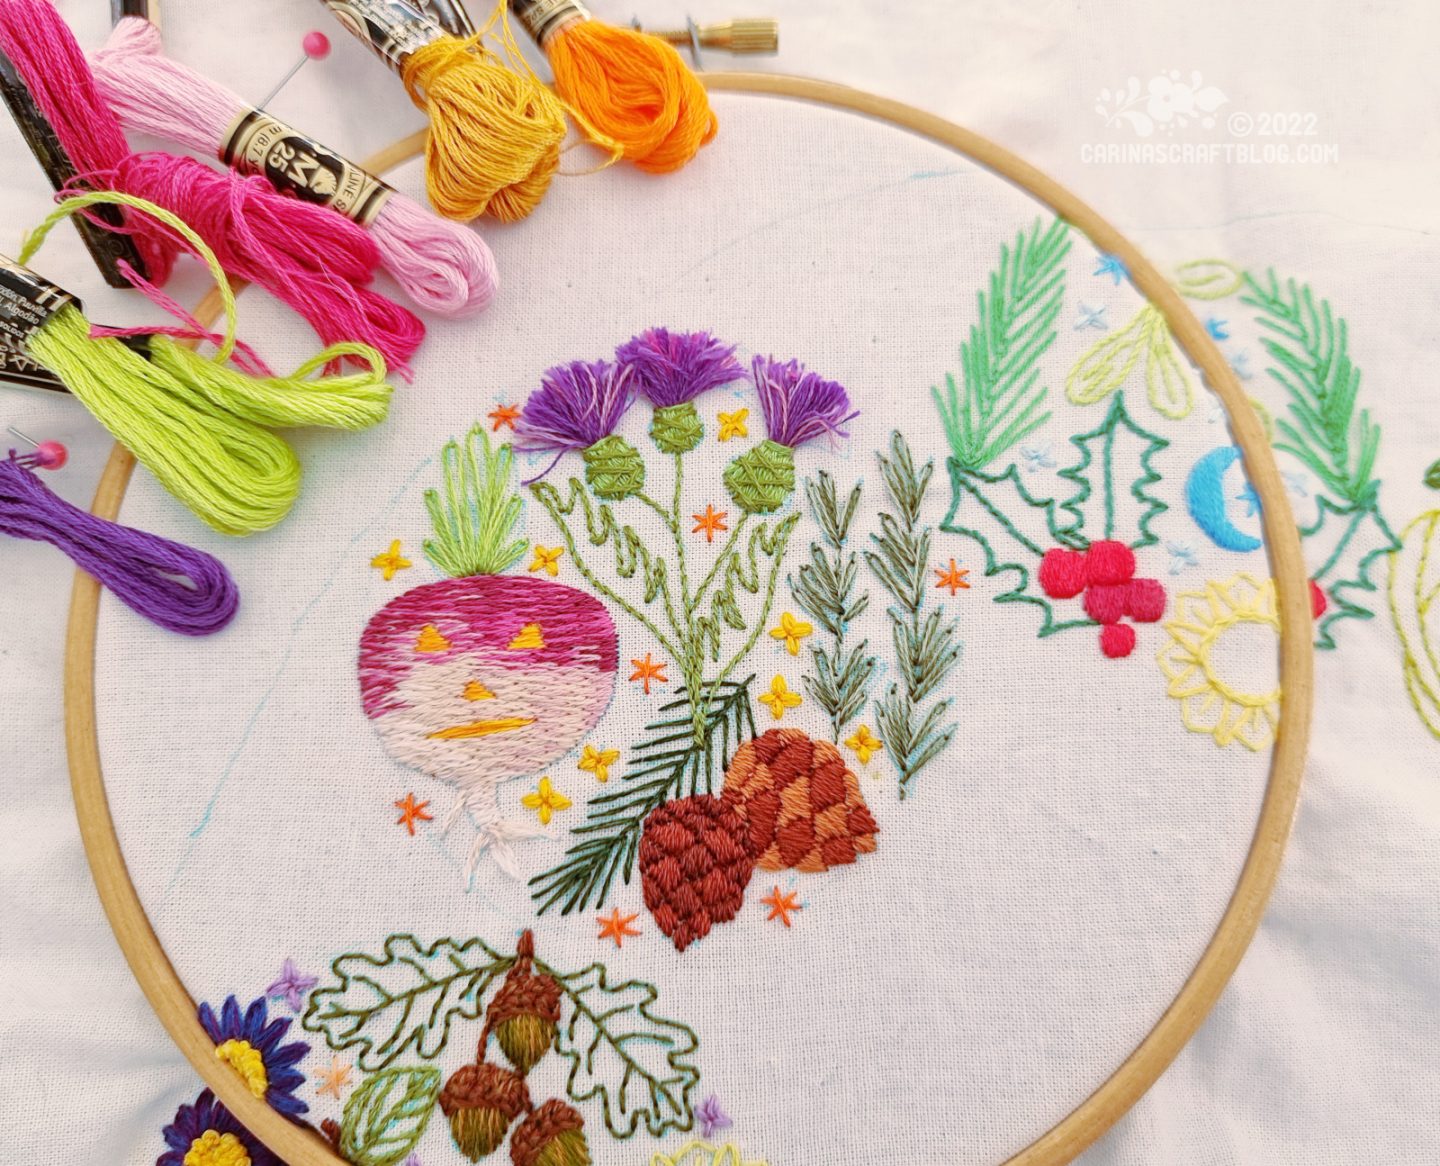 White fabric in a wood embroidery hoop. On the fabric is embroidered a design in a circular shape with thistles, pine cones, rosemary and a carved turnip.